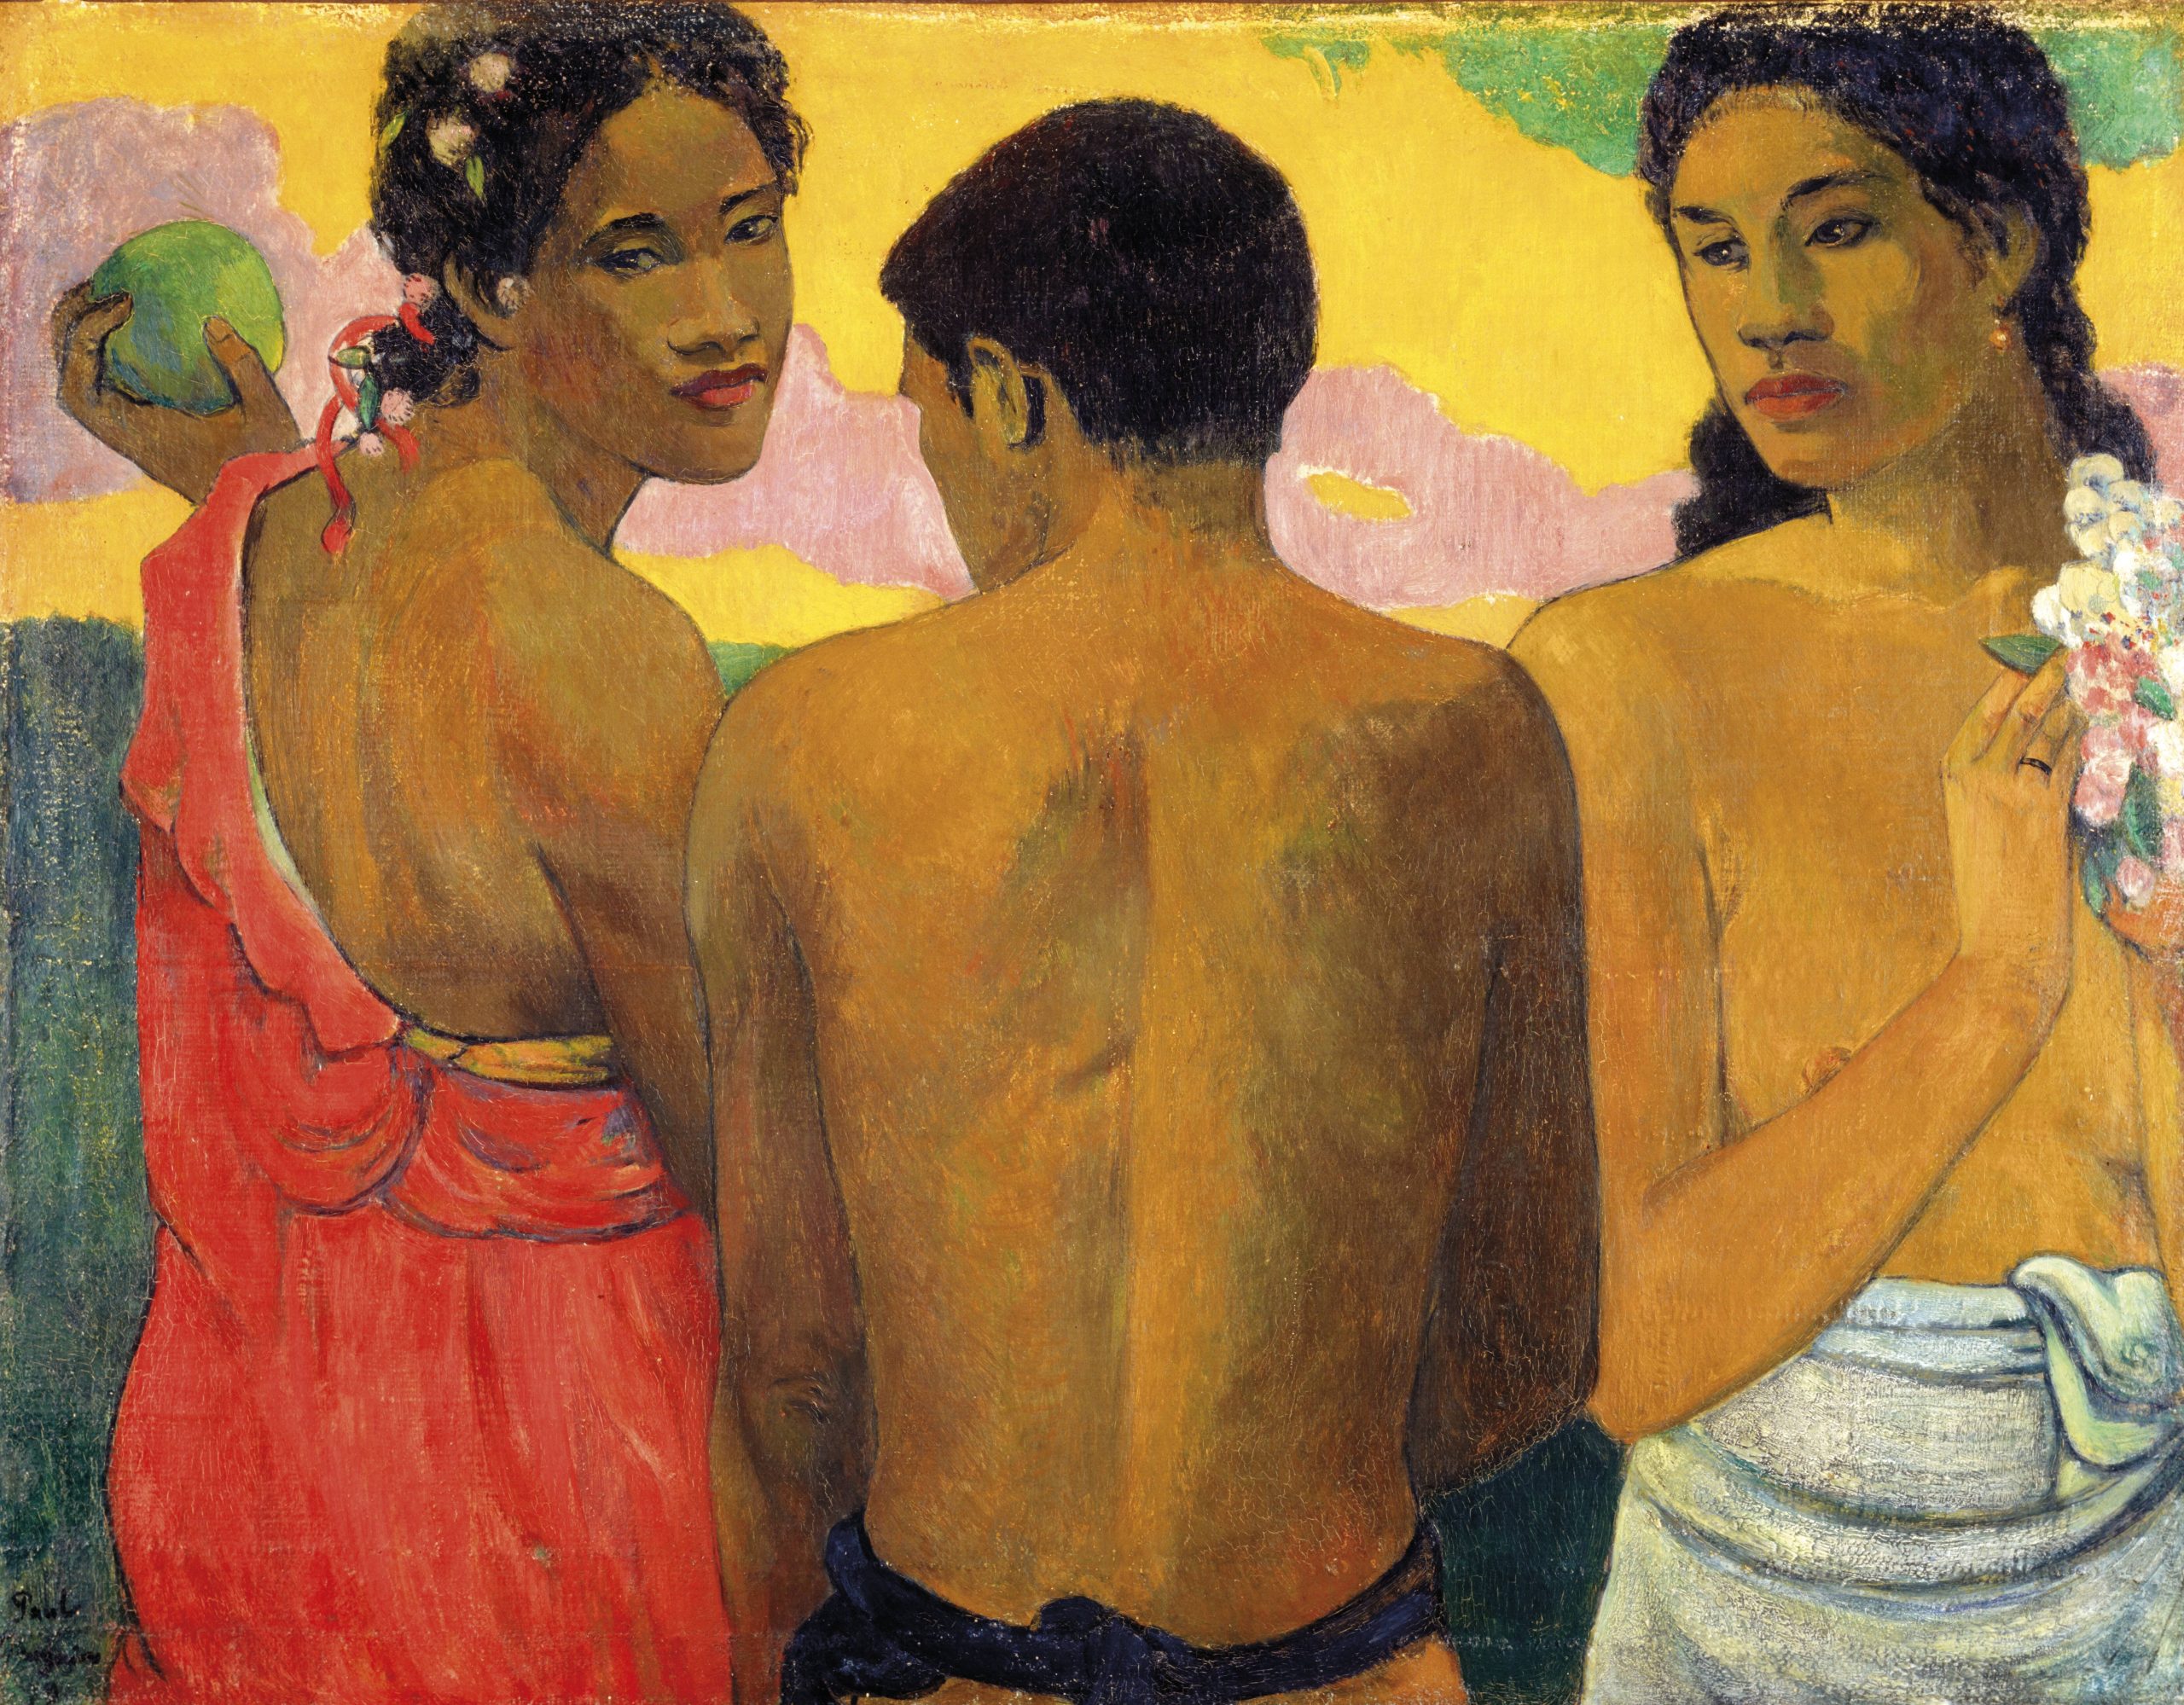 Gauguin’s World at the MFAH: A Sensual Journey Through Post-Impressionist Paradise